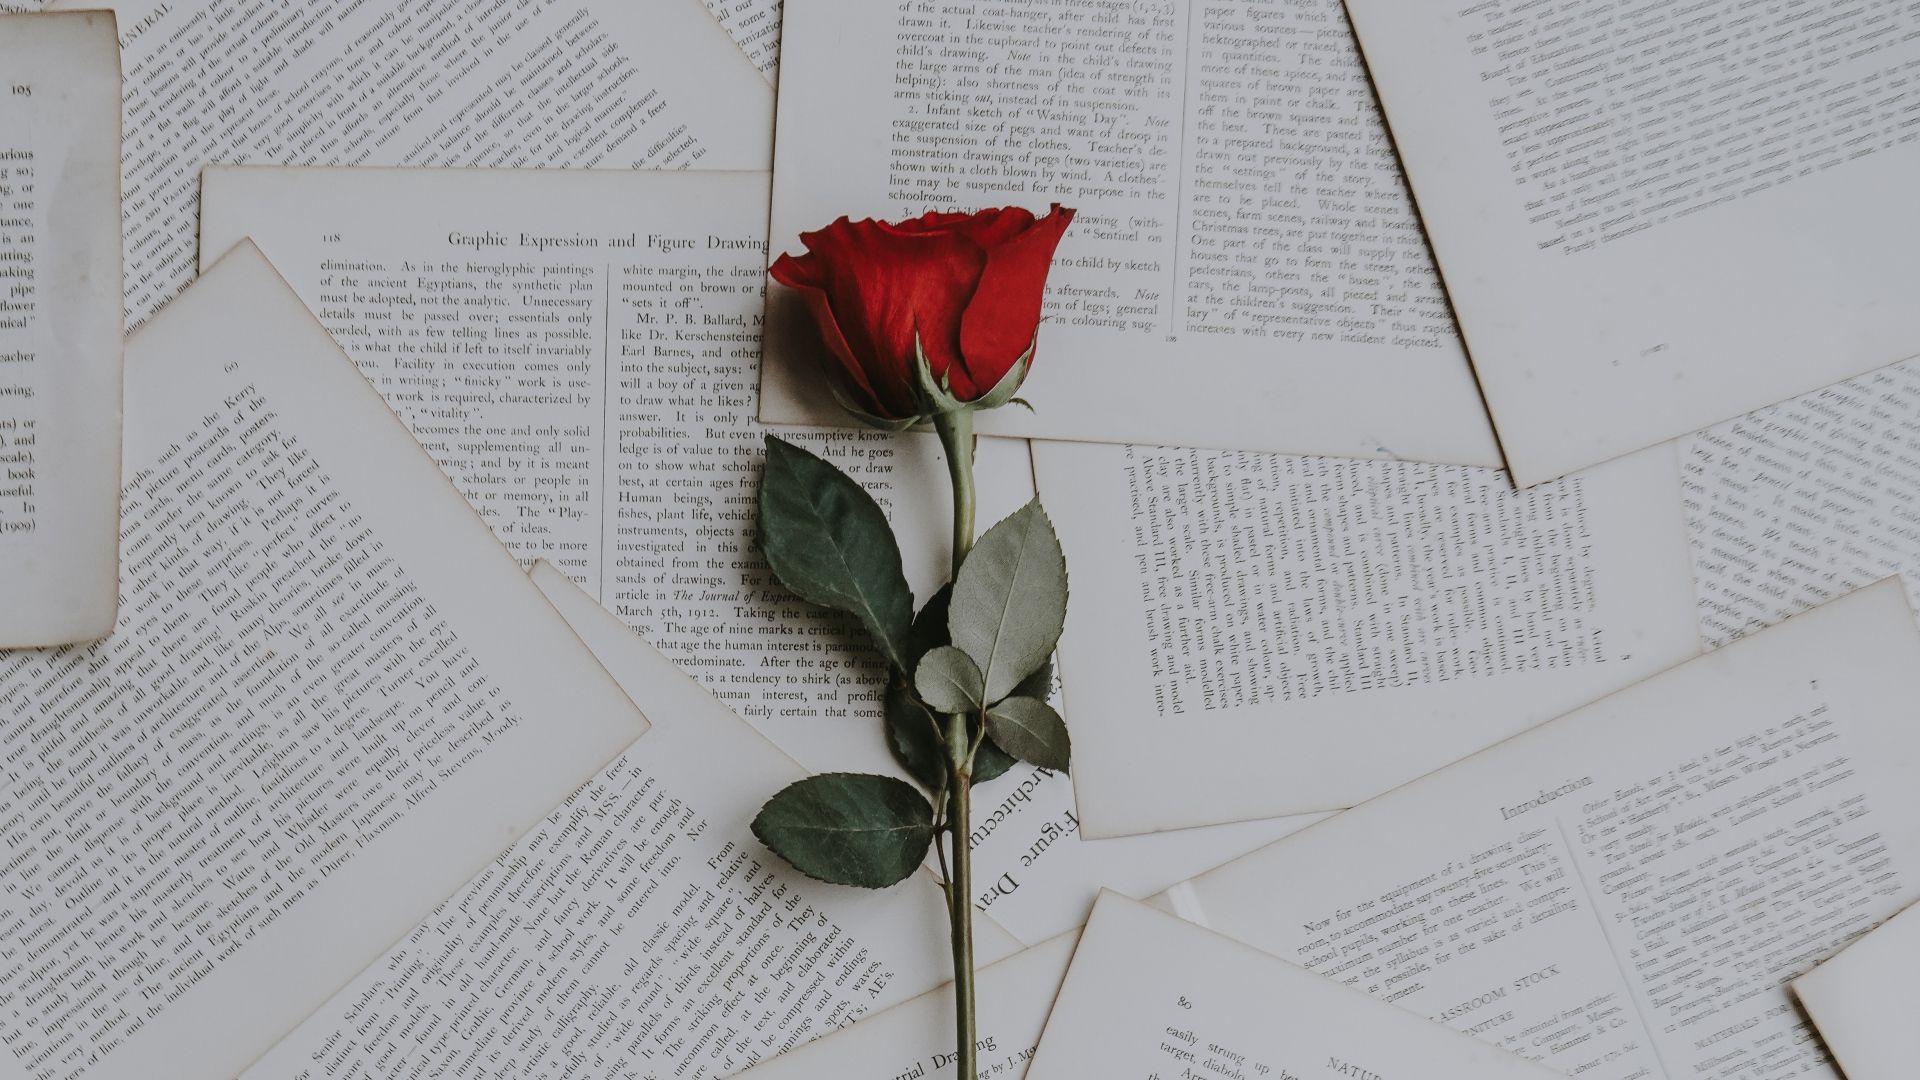 A single red rose is placed among many books - Books